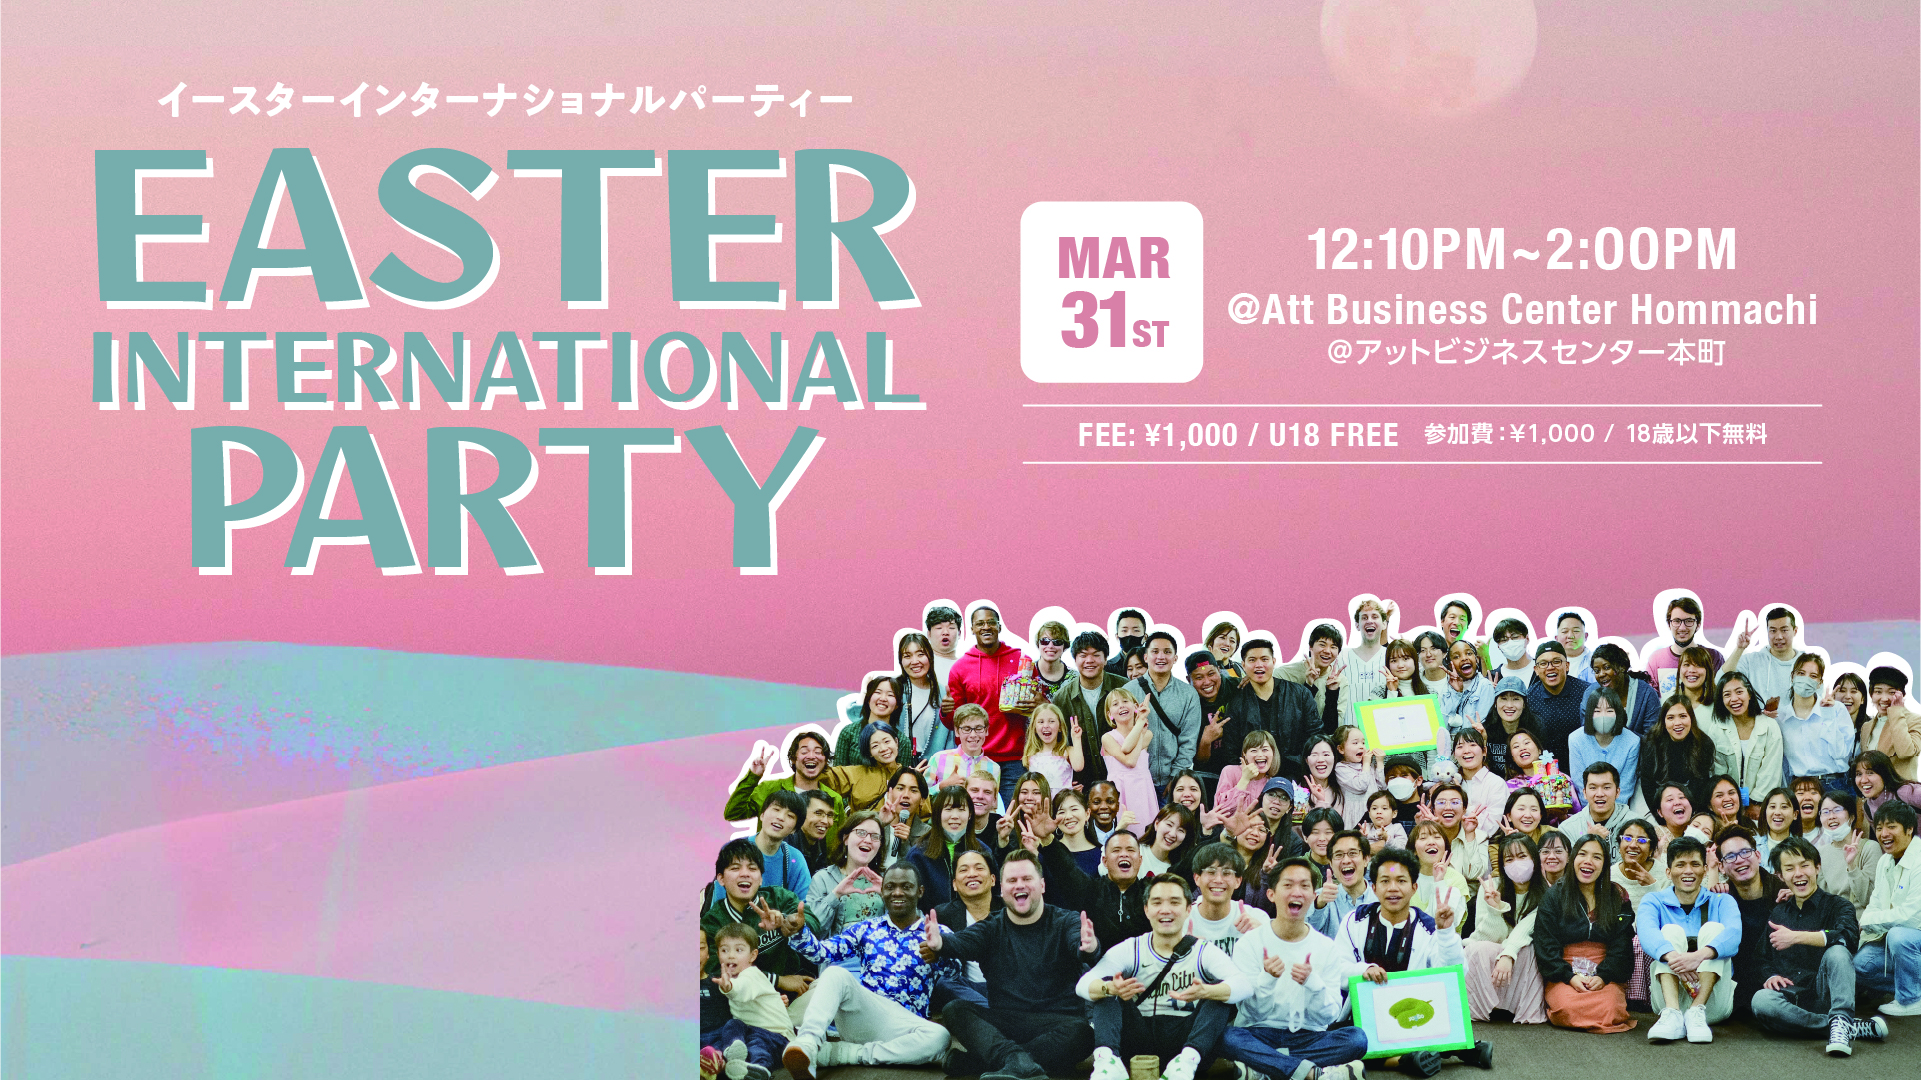 Featured image for “3/31 International Easter Party”